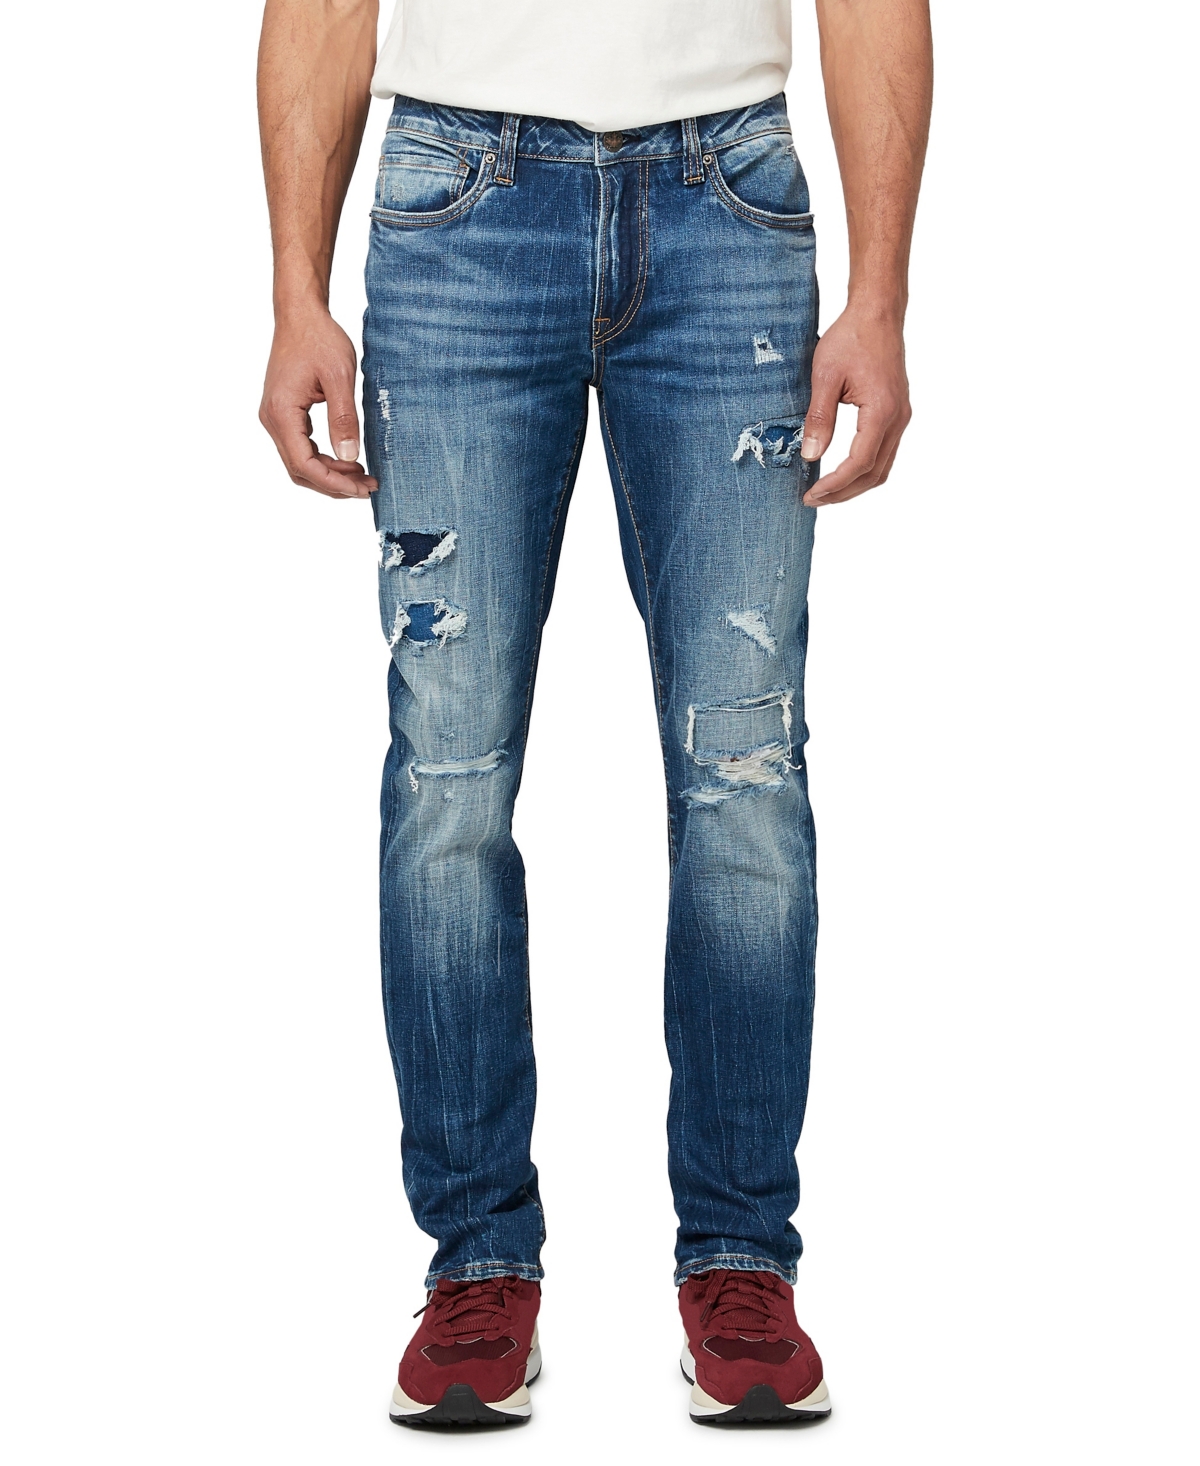 Buffalo Men's Slim Ash Veined and Worked Jeans - Indigo